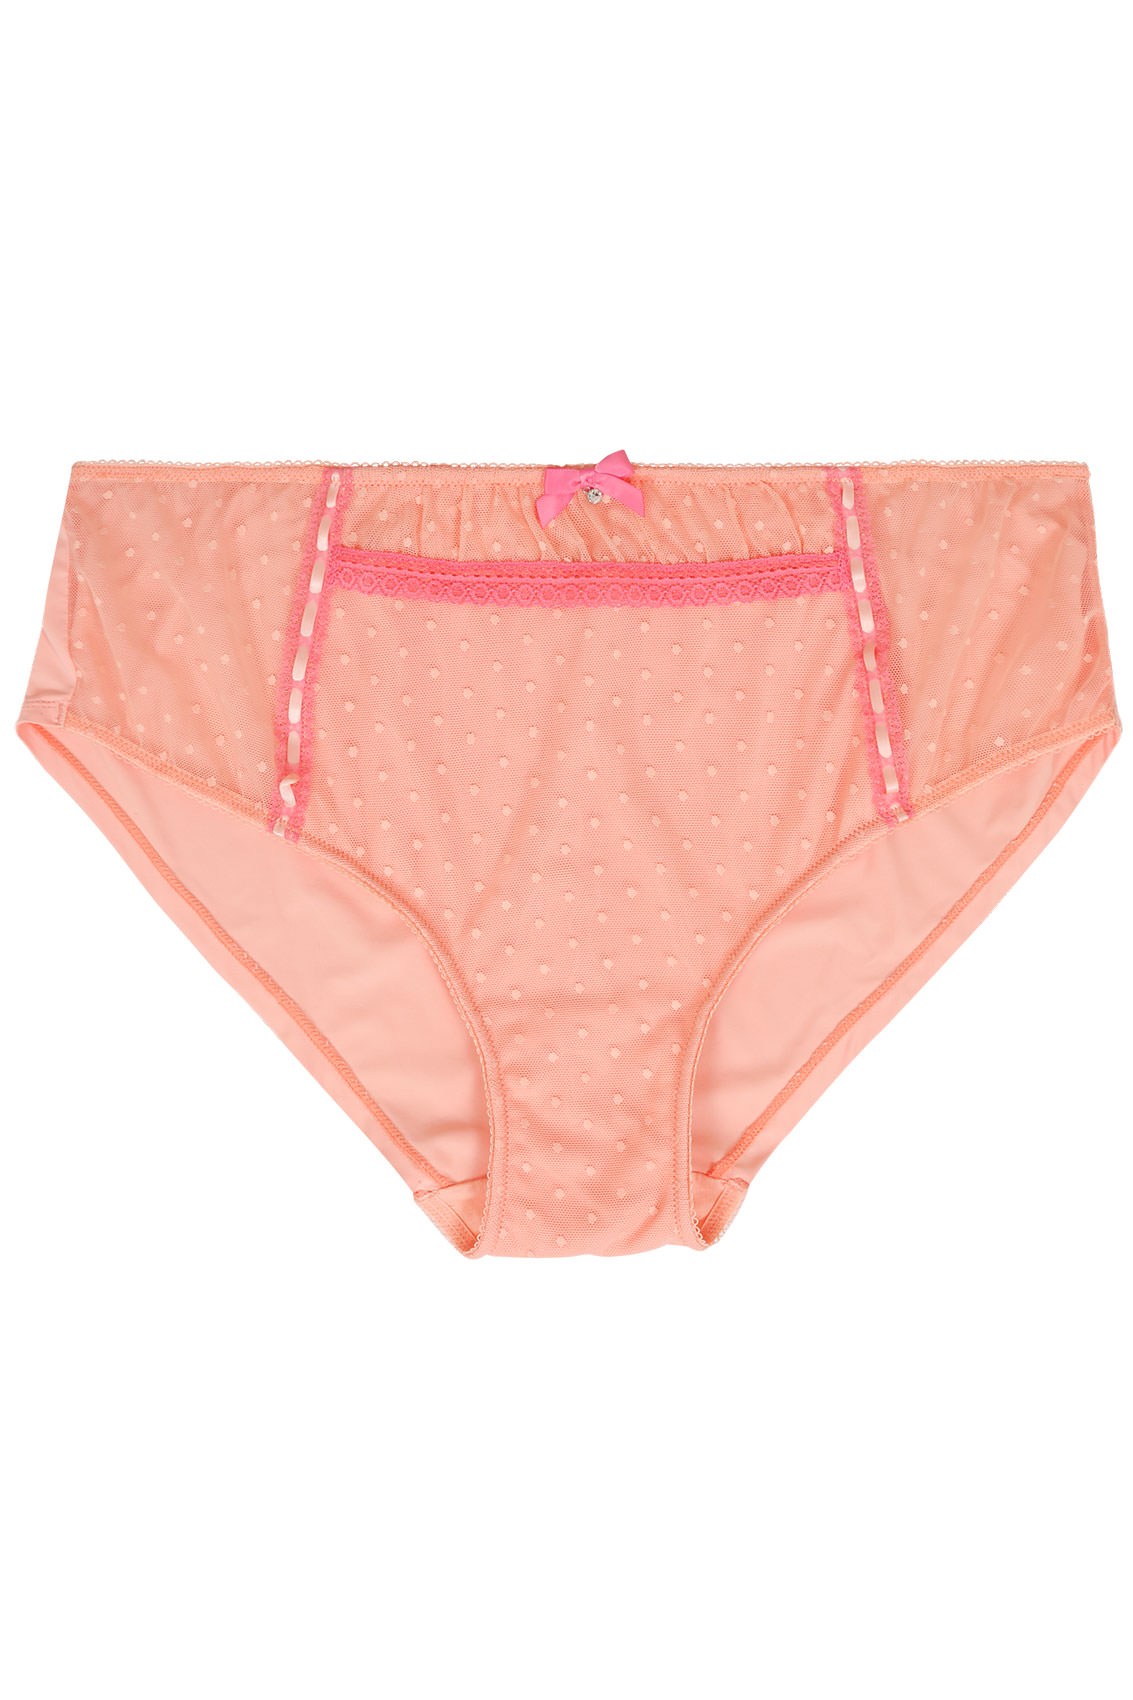 Peach Spotted Mesh Briefs With Ribbon Detail, Plus size 14 ...